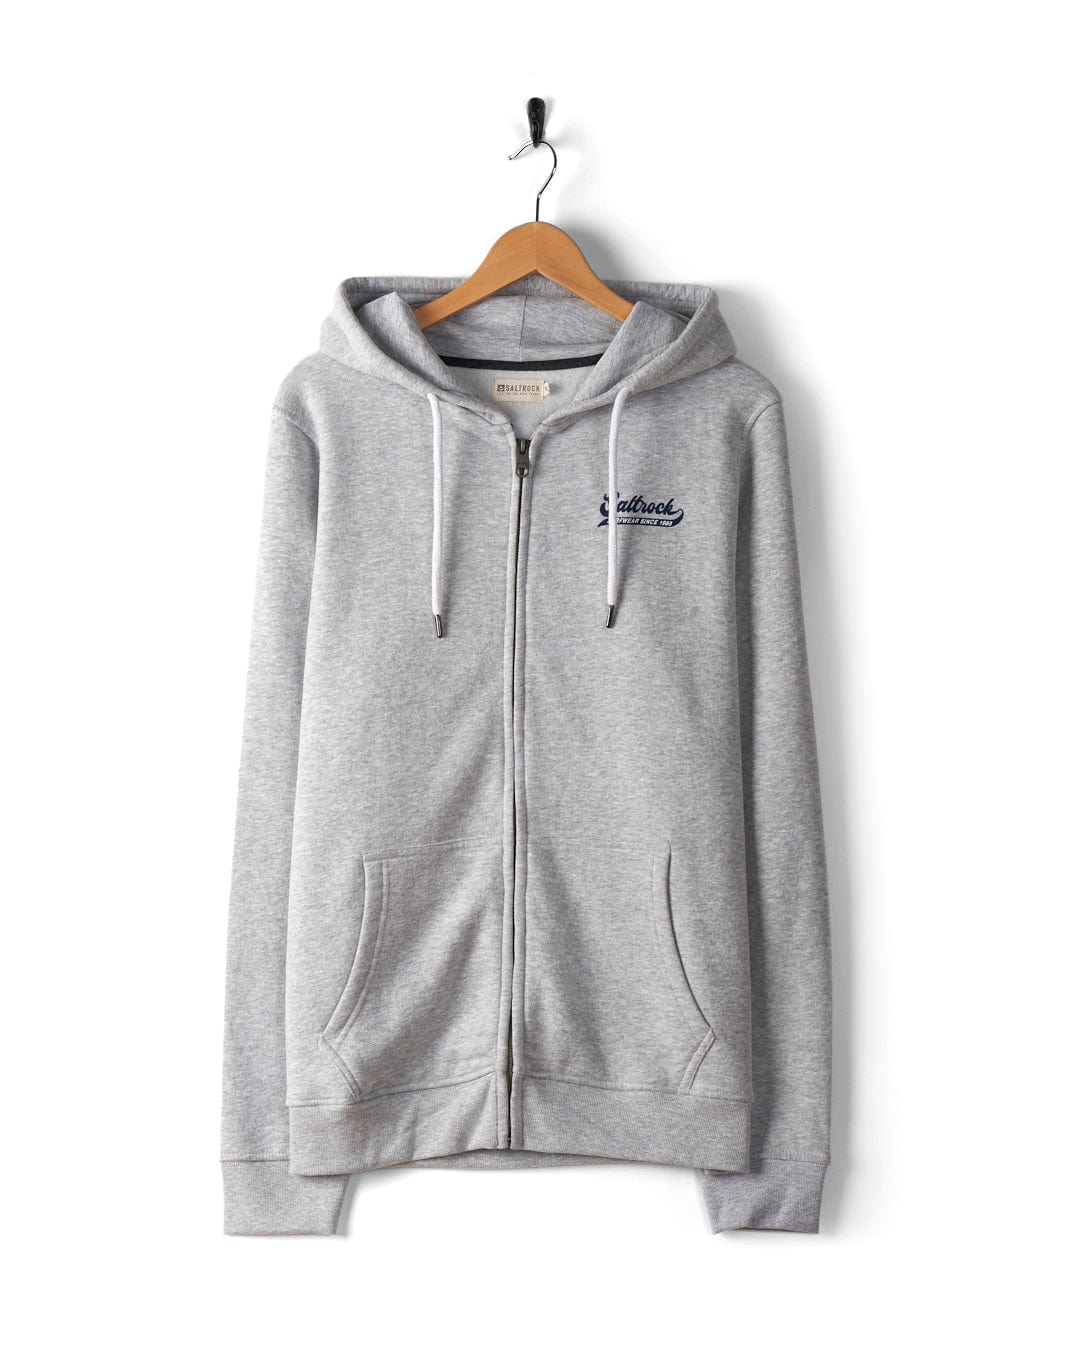 A Home Run - Mens Zip Hoodie - Grey with Saltrock branding on the left chest hangs on a wooden hanger, suspended by a metal hook against a white background. Featuring a hood with drawstrings, this stylish piece is machine washable for easy care.